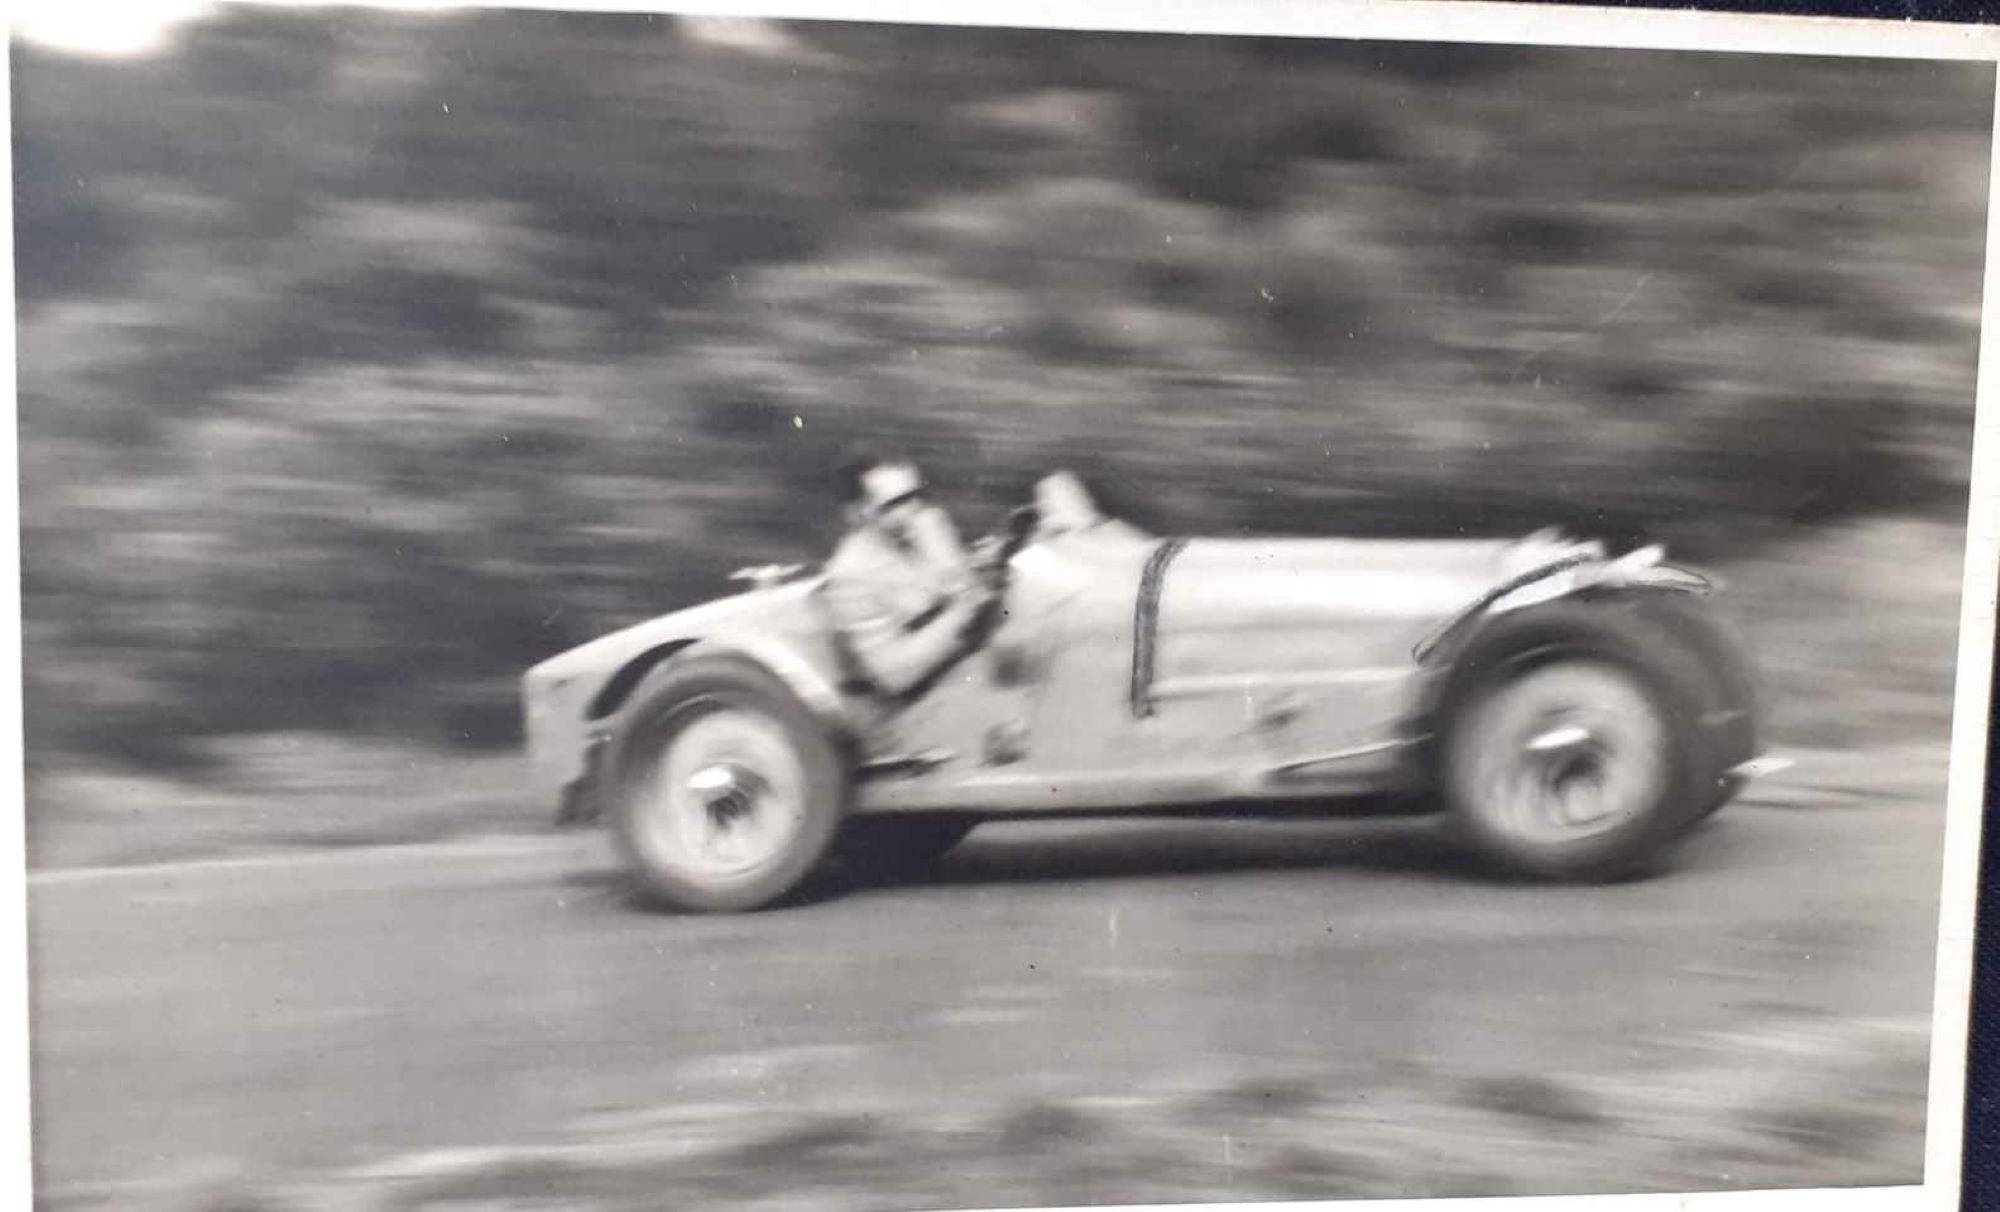 Name:  NSCC 1950 #0116 Bugatti T35 at speed - light colour 1950's - image Graeme Wells arch Anthony Wel.jpg
Views: 163
Size:  158.1 KB